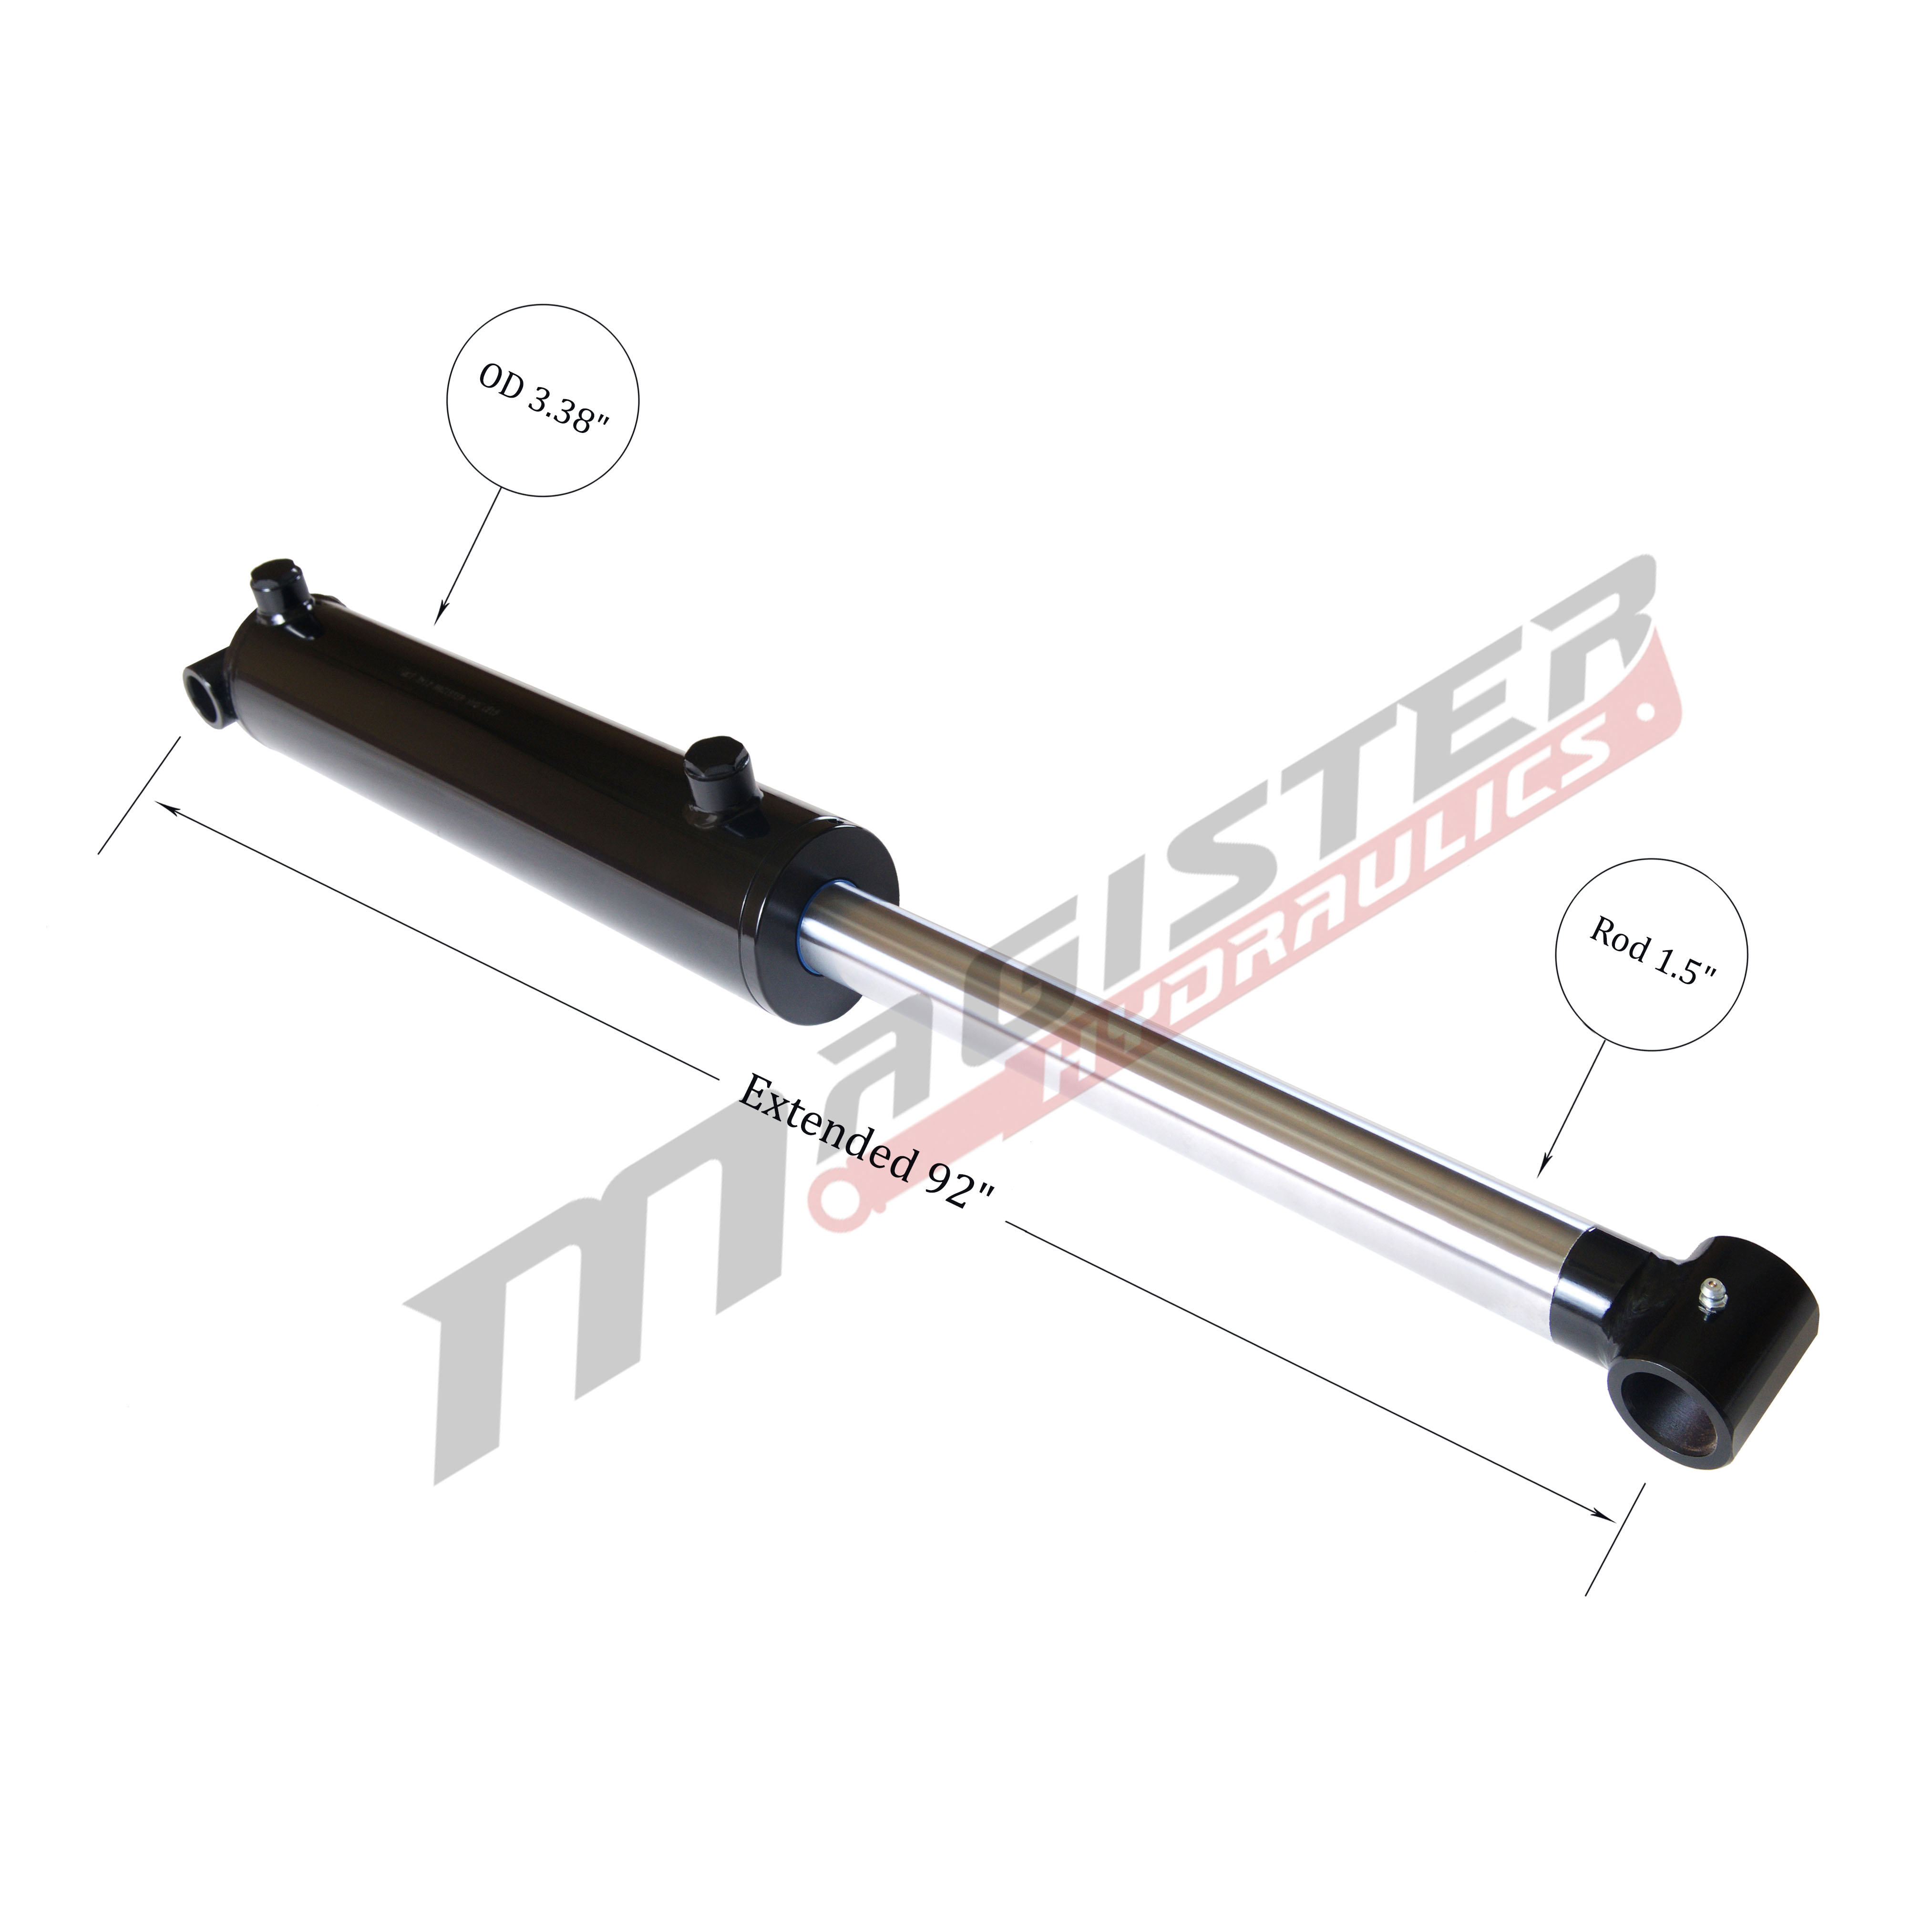 3 bore x 42 stroke hydraulic cylinder, welded cross tube double acting cylinder | Magister Hydraulics